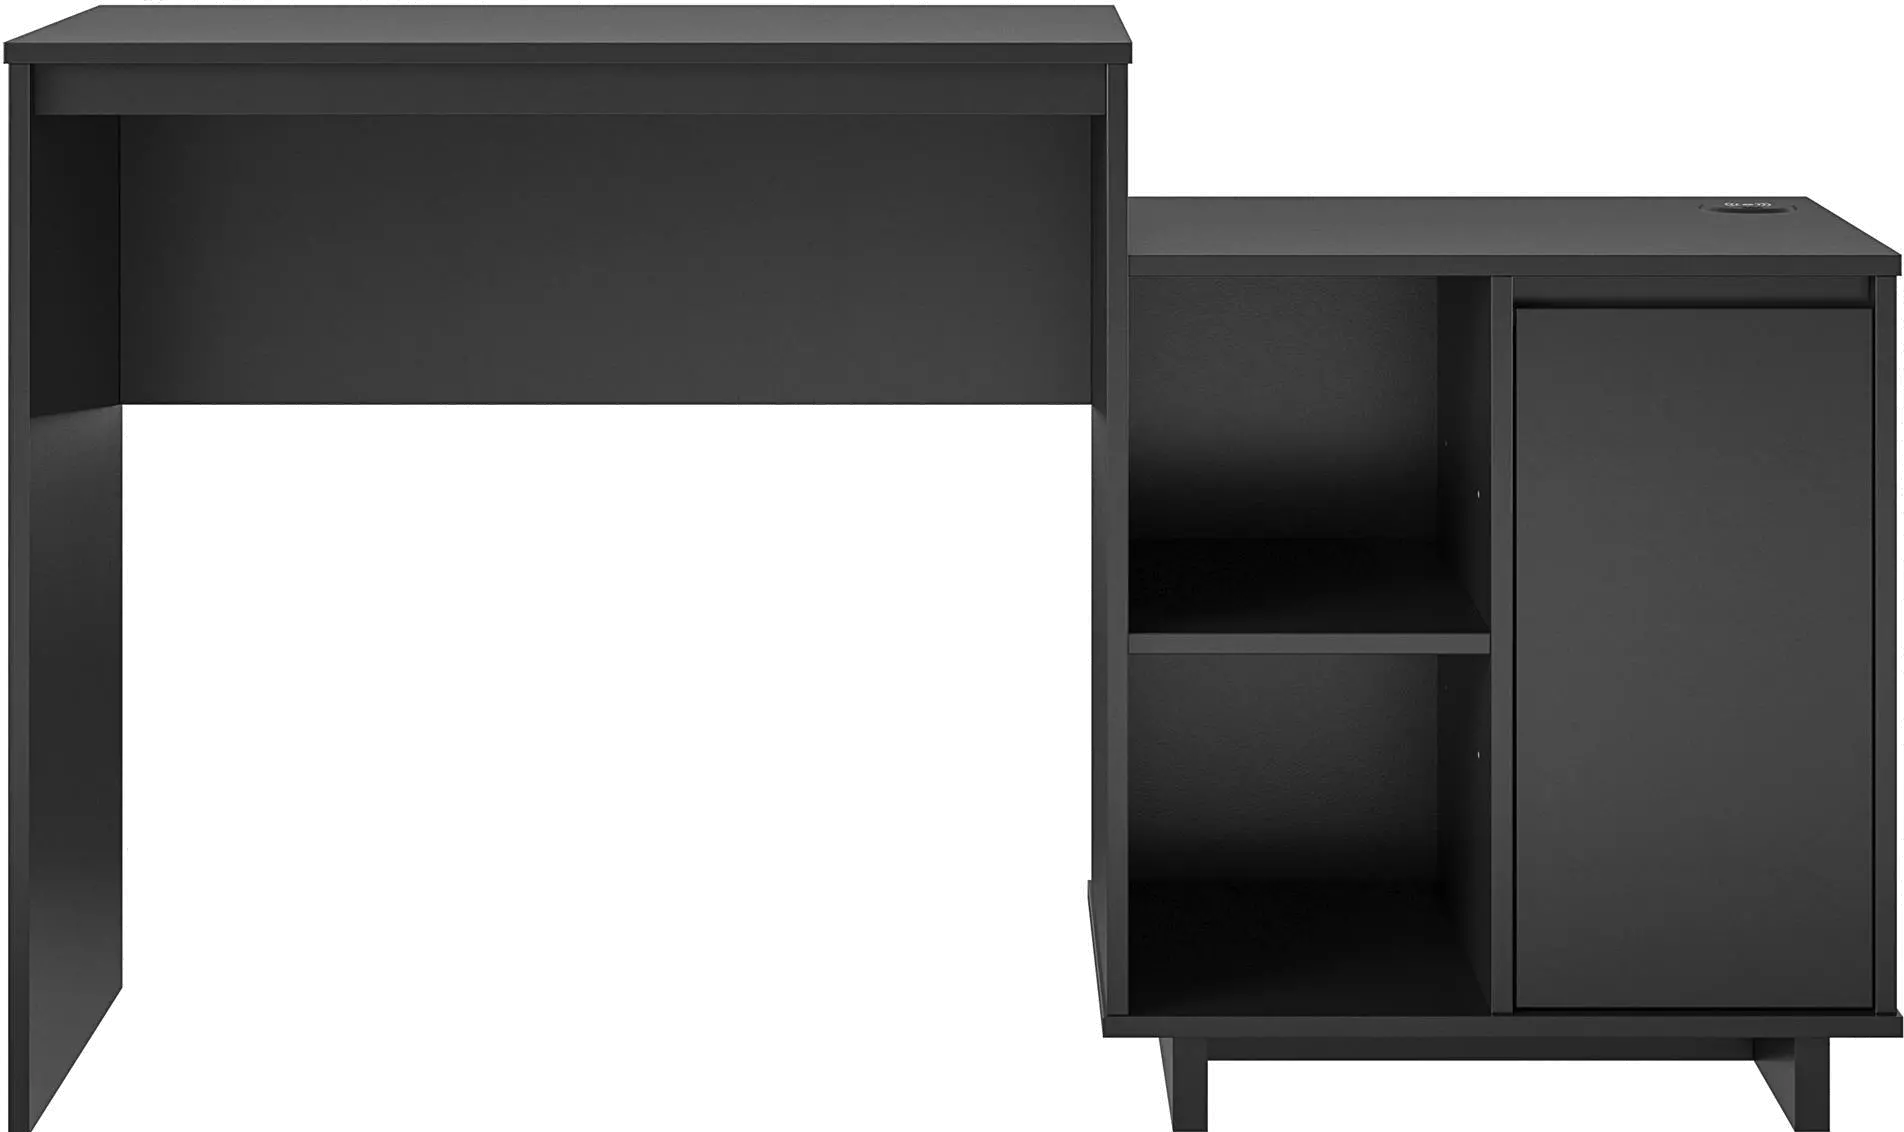 Ravelston Black Computer Desk with Cabinet and Wireless Charging Port